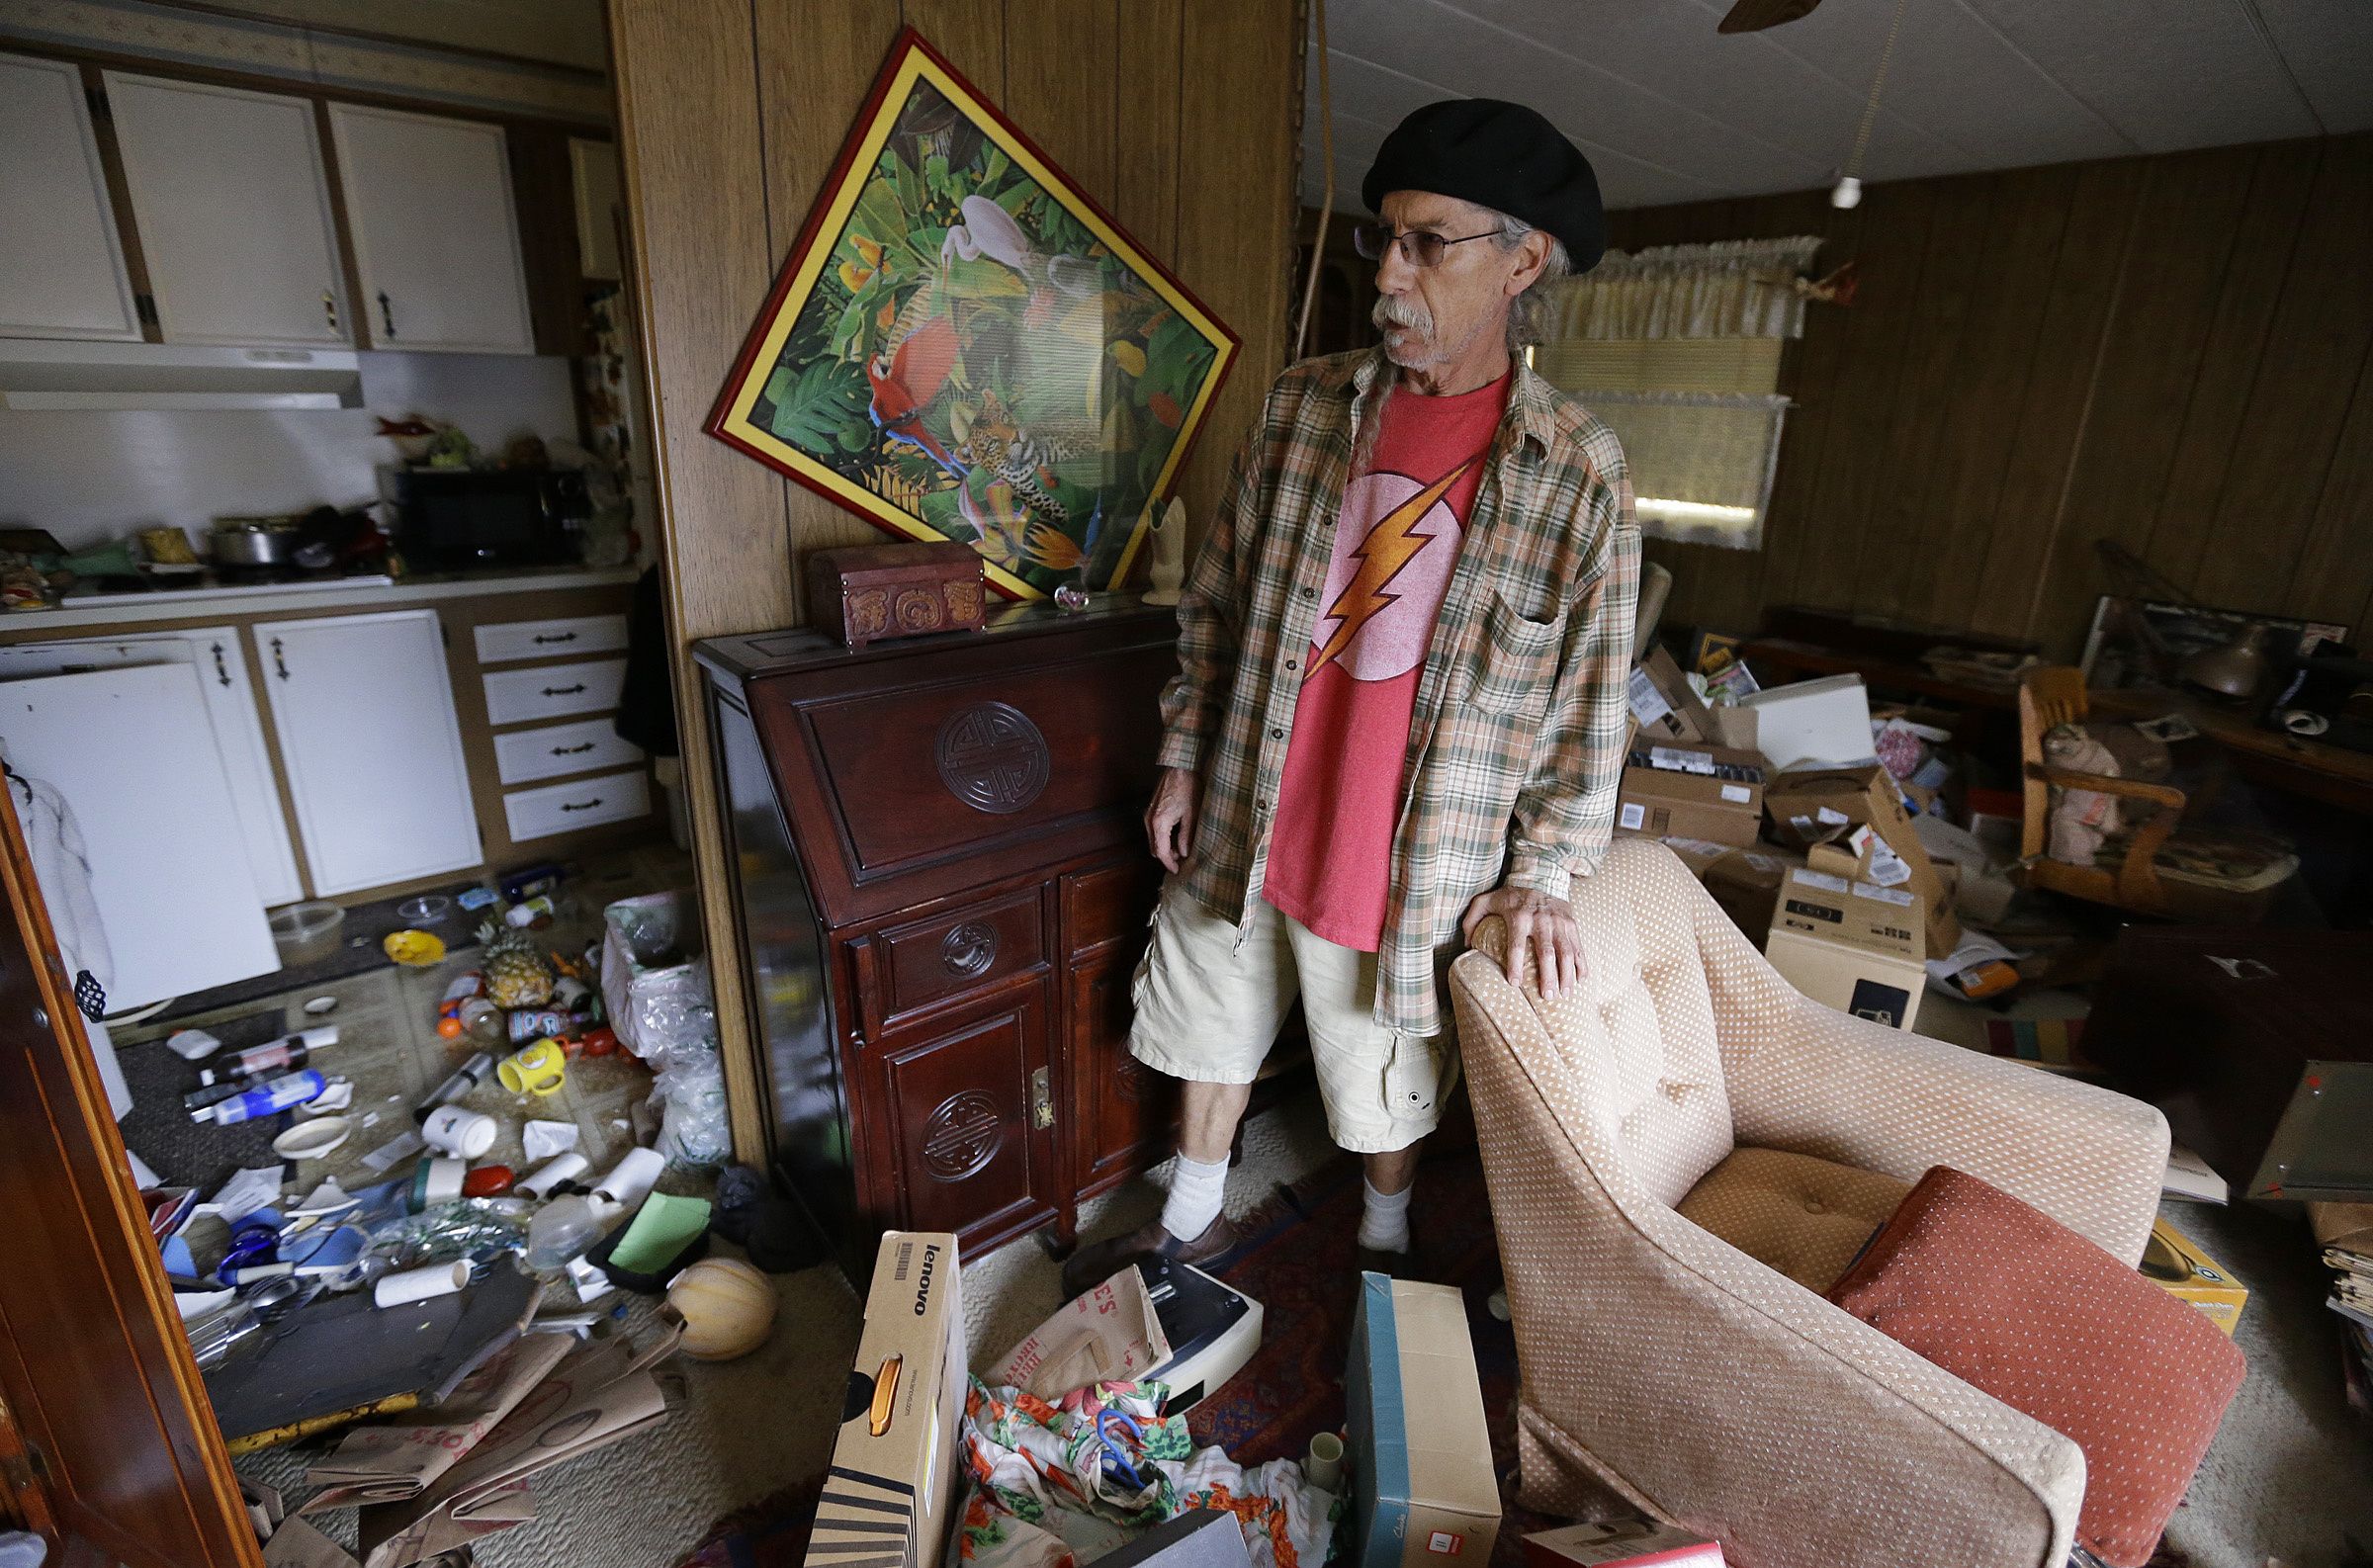 Home interior in aftermath of 2014 earthquake in Napa Valley